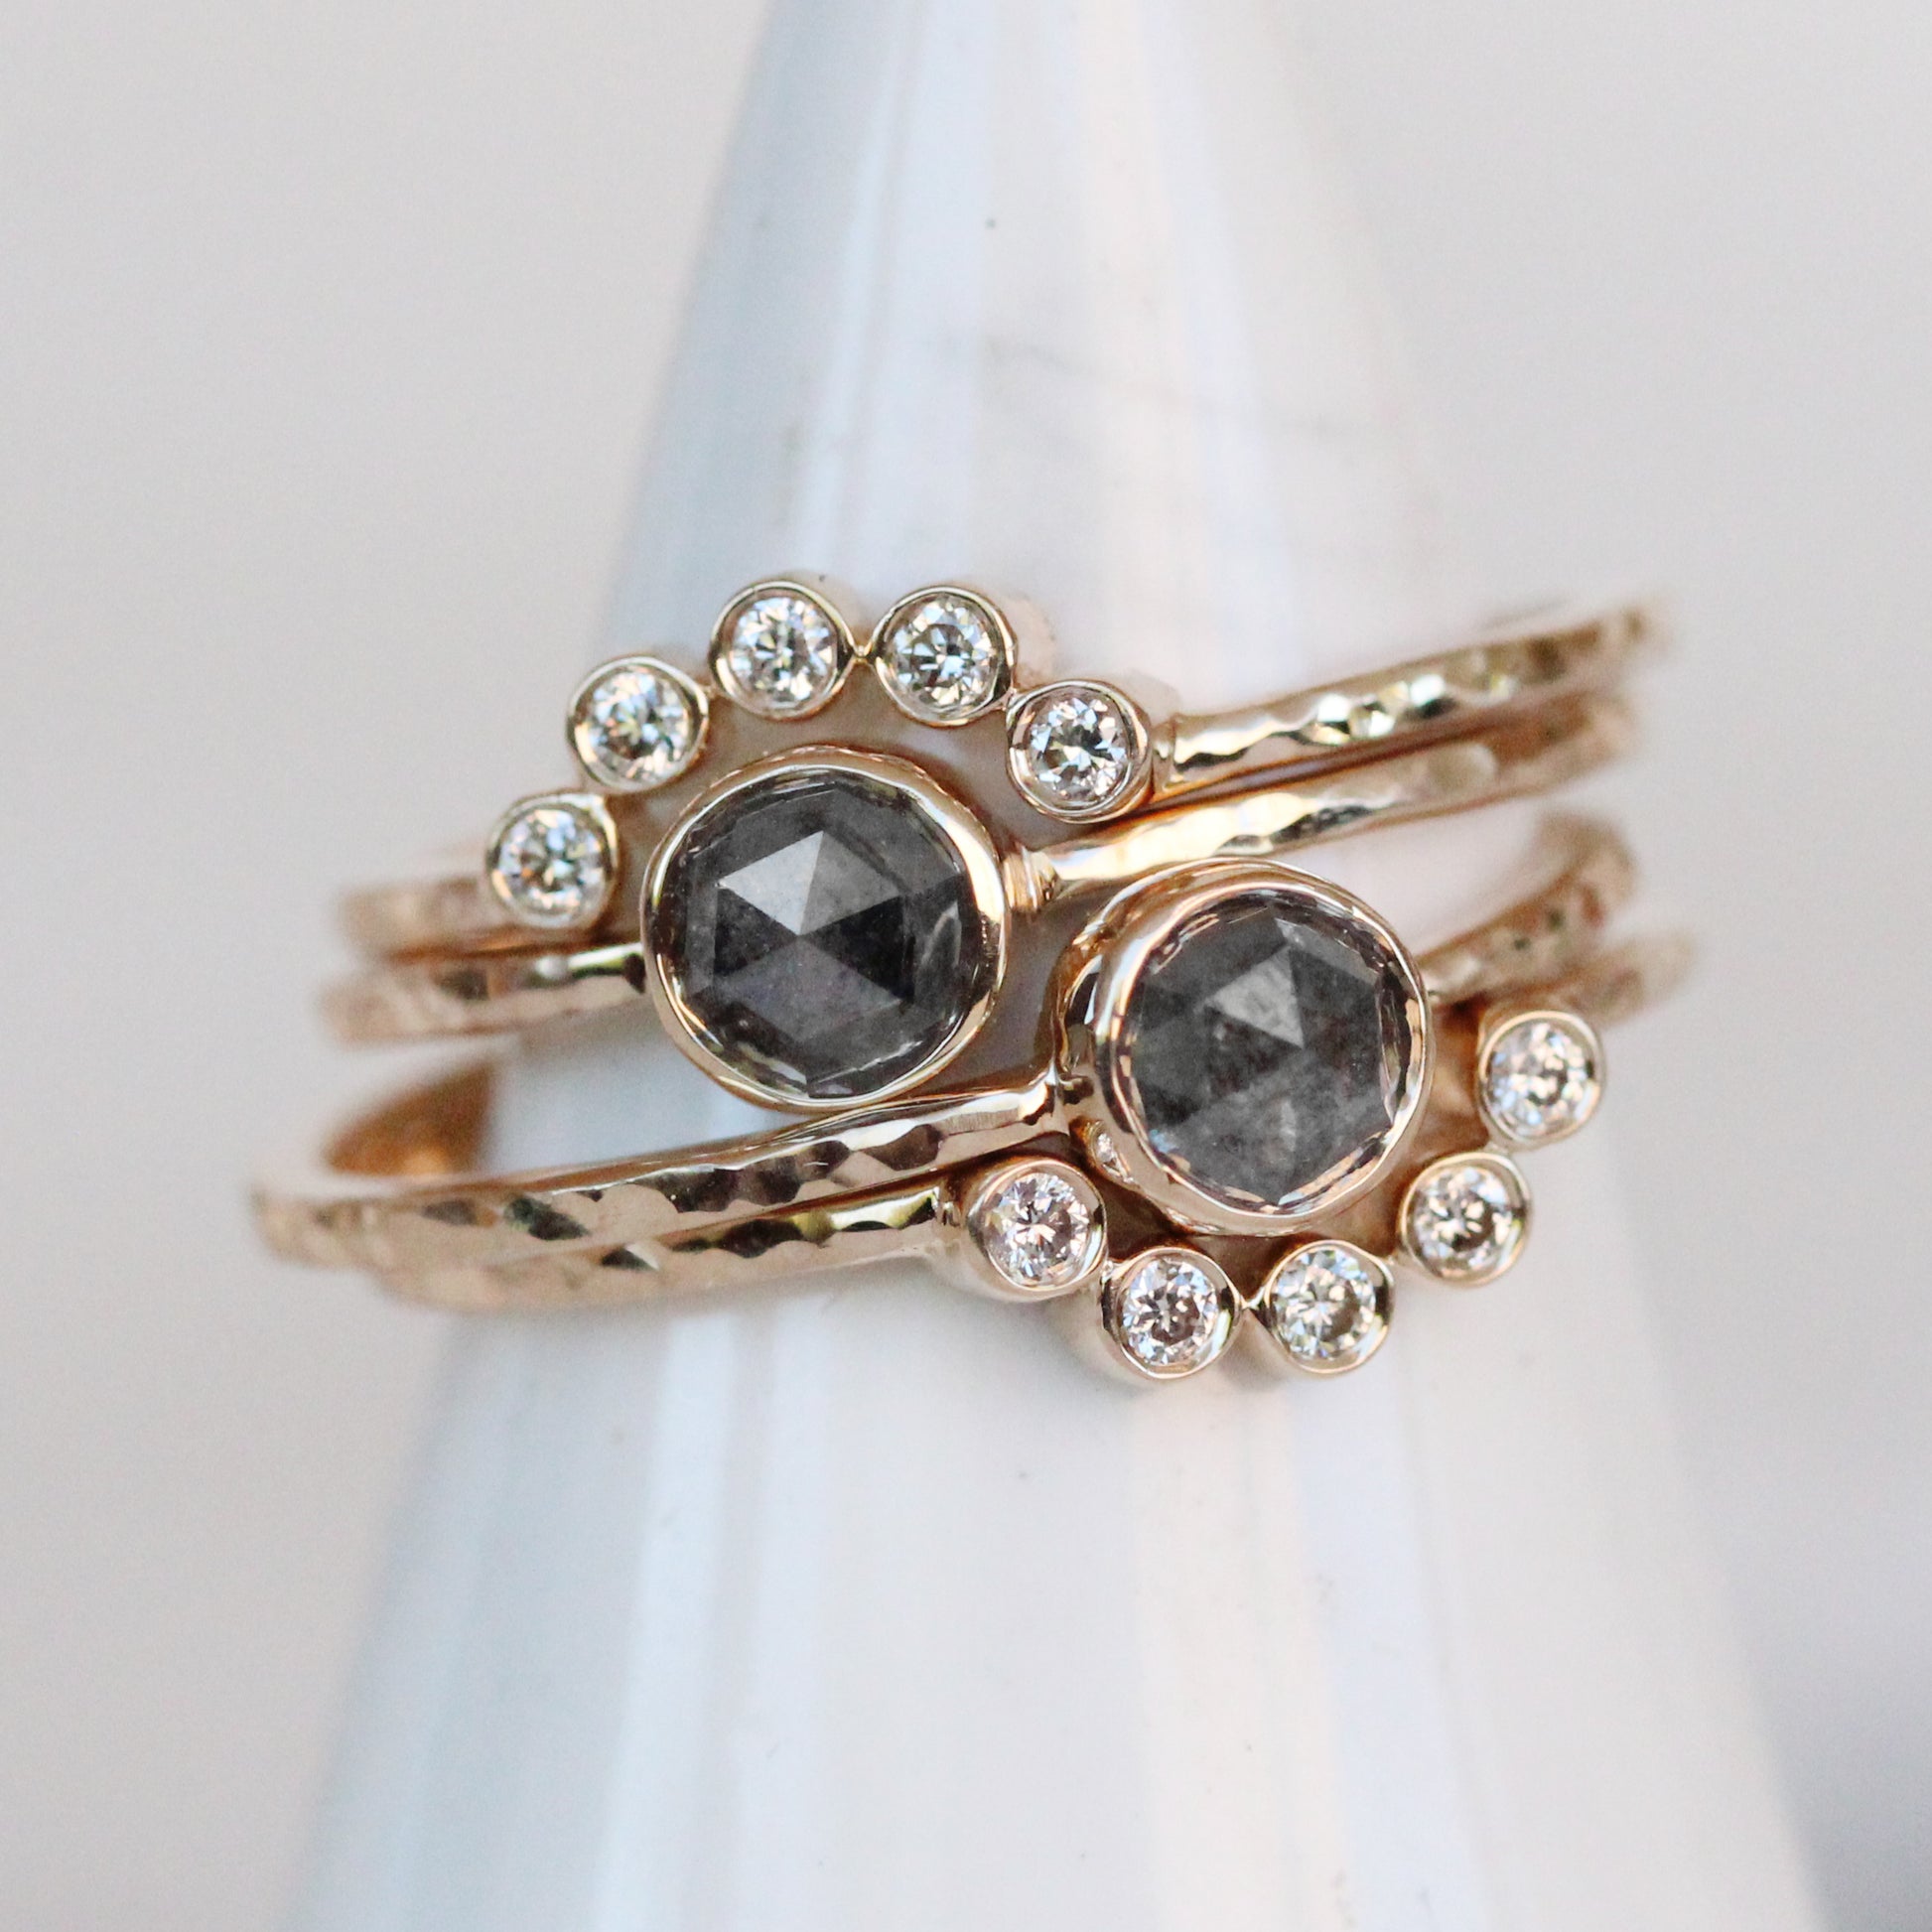 Set of 2 - Limited Edition - Ring Drop No.1 - Bezel set rose cut solitaire and matching diamond band in champagne gold - hammered - ready to size and ship - Midwinter Co. Alternative Bridal Rings and Modern Fine Jewelry